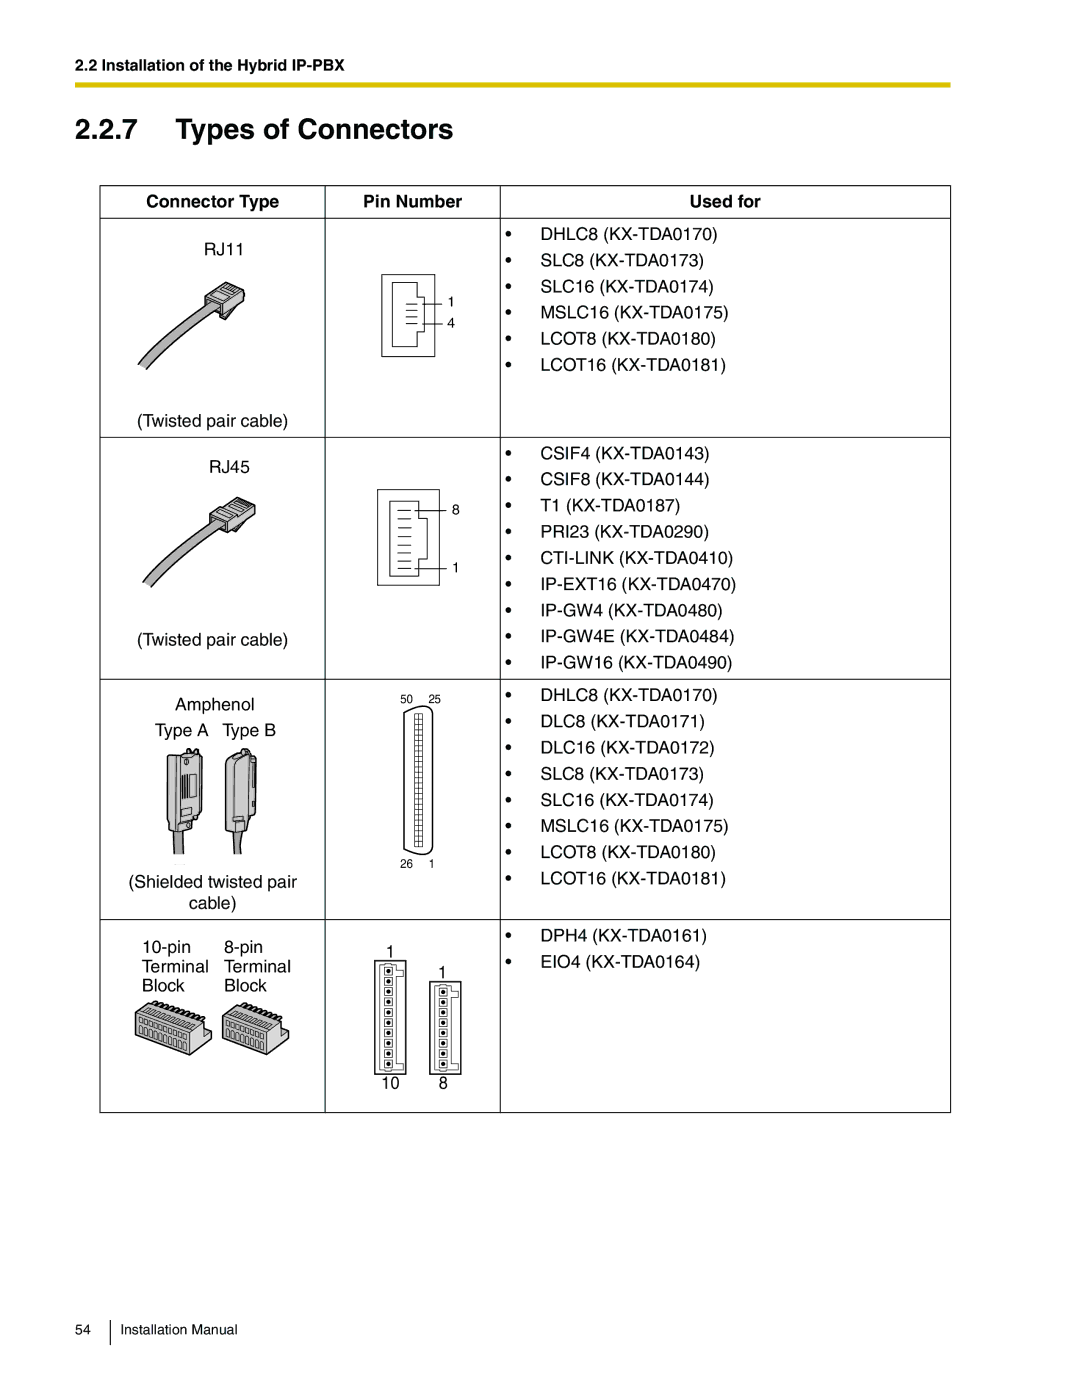 Panasonic KX-TDA100 installation manual Types of Connectors, Connector Type Pin Number Used for, CTI-LINK KX-TDA0410 